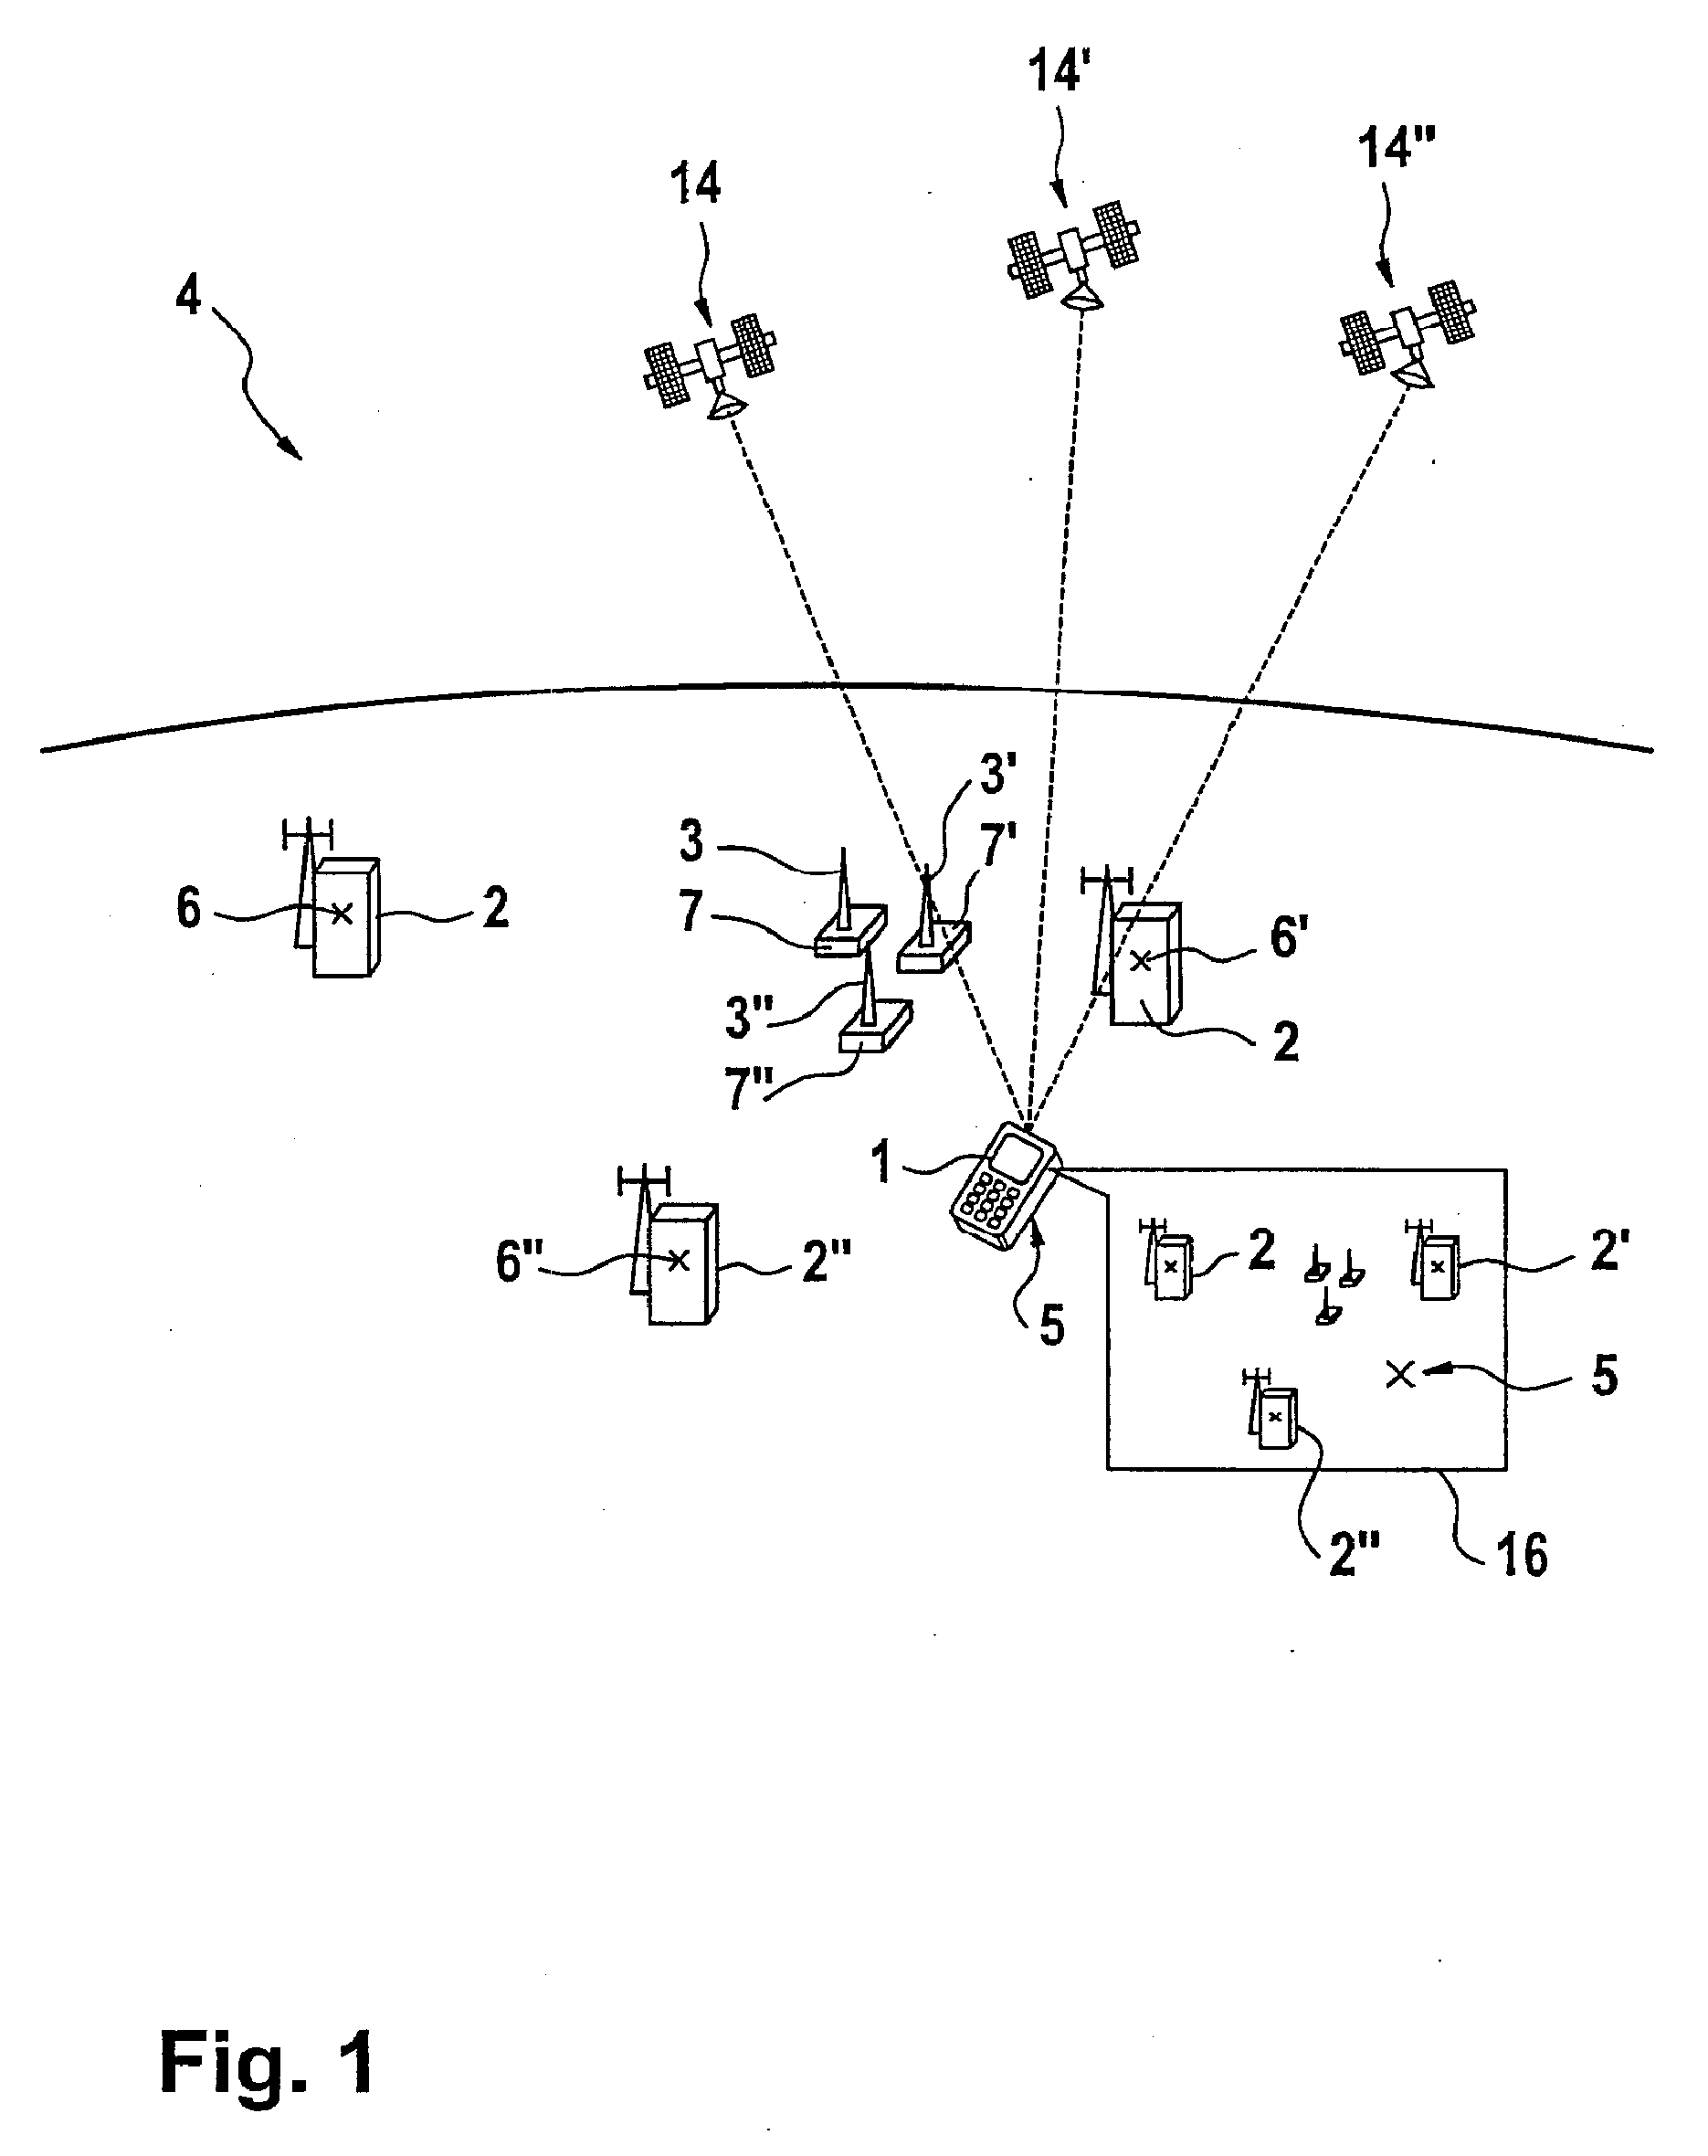 Method for establishiing a synchronization or for establishing a connection between a mobile terminal and an access point